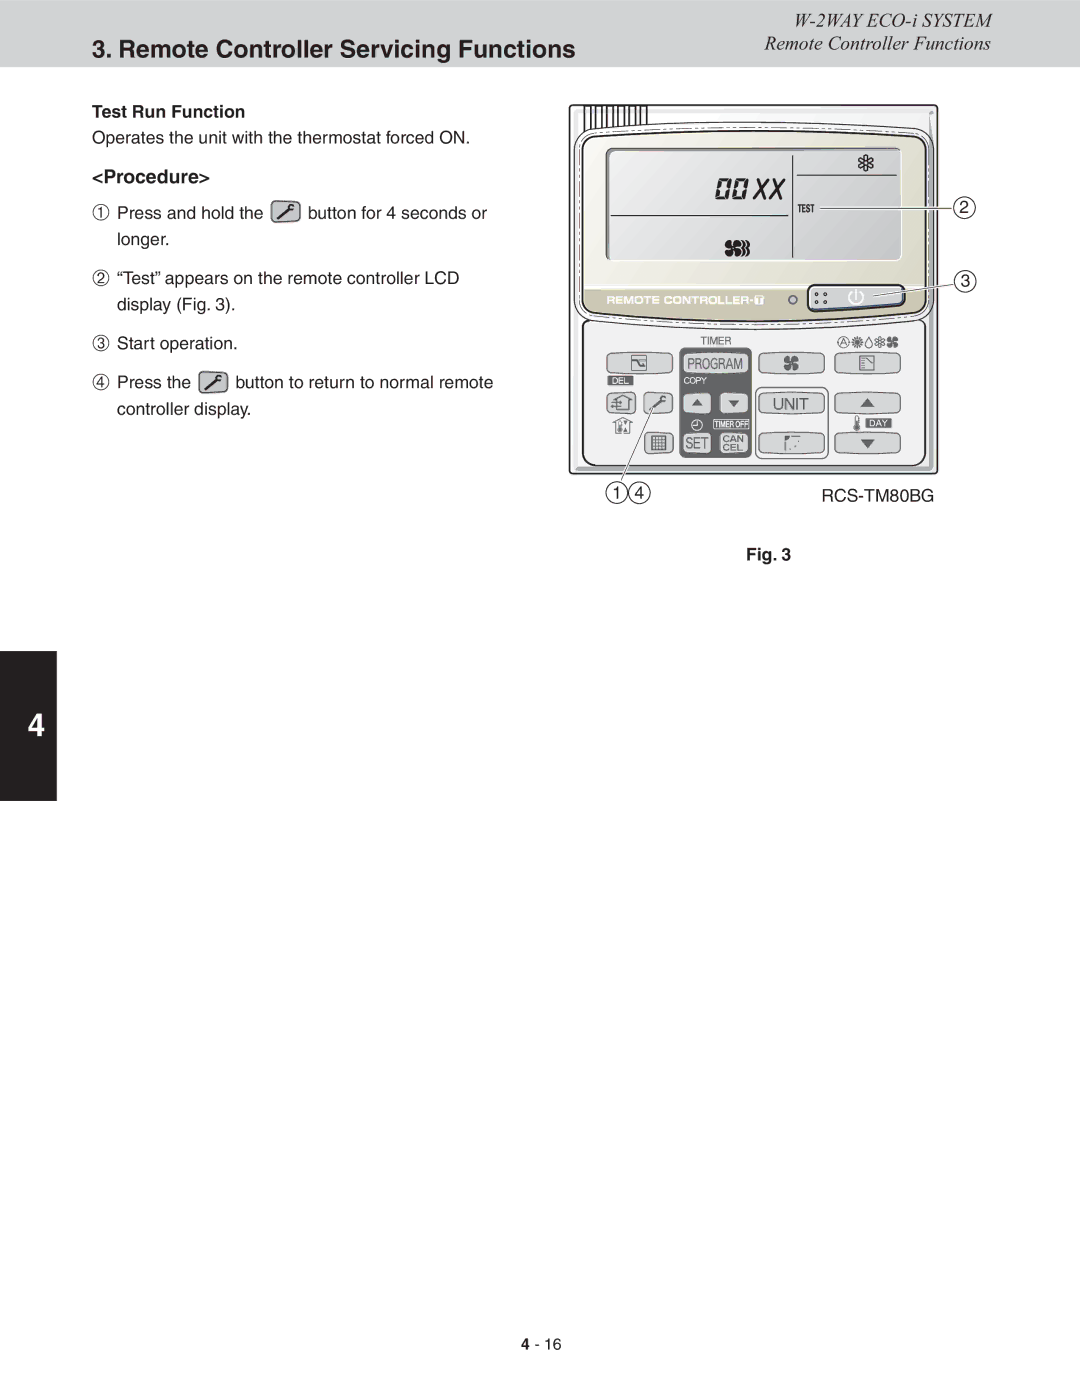 Sanyo CHDXR07263*, CHDXR09663, CHDX09663 Procedure, Test Run Function, Operates the unit with the thermostat forced on 